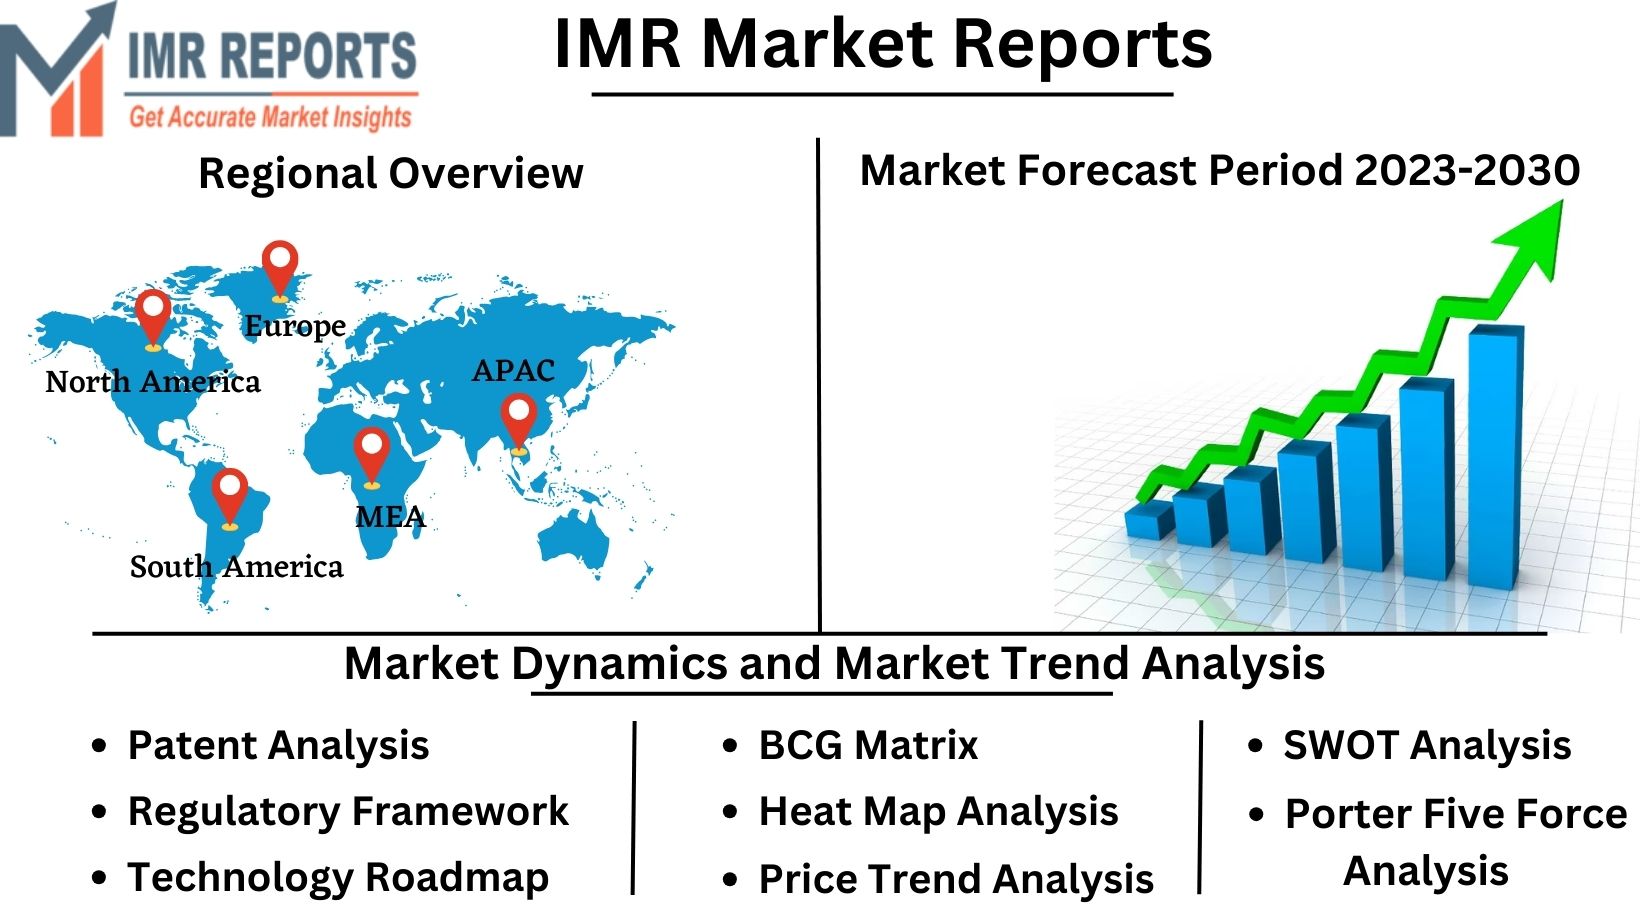 IMR_Market_Reports_(1)68